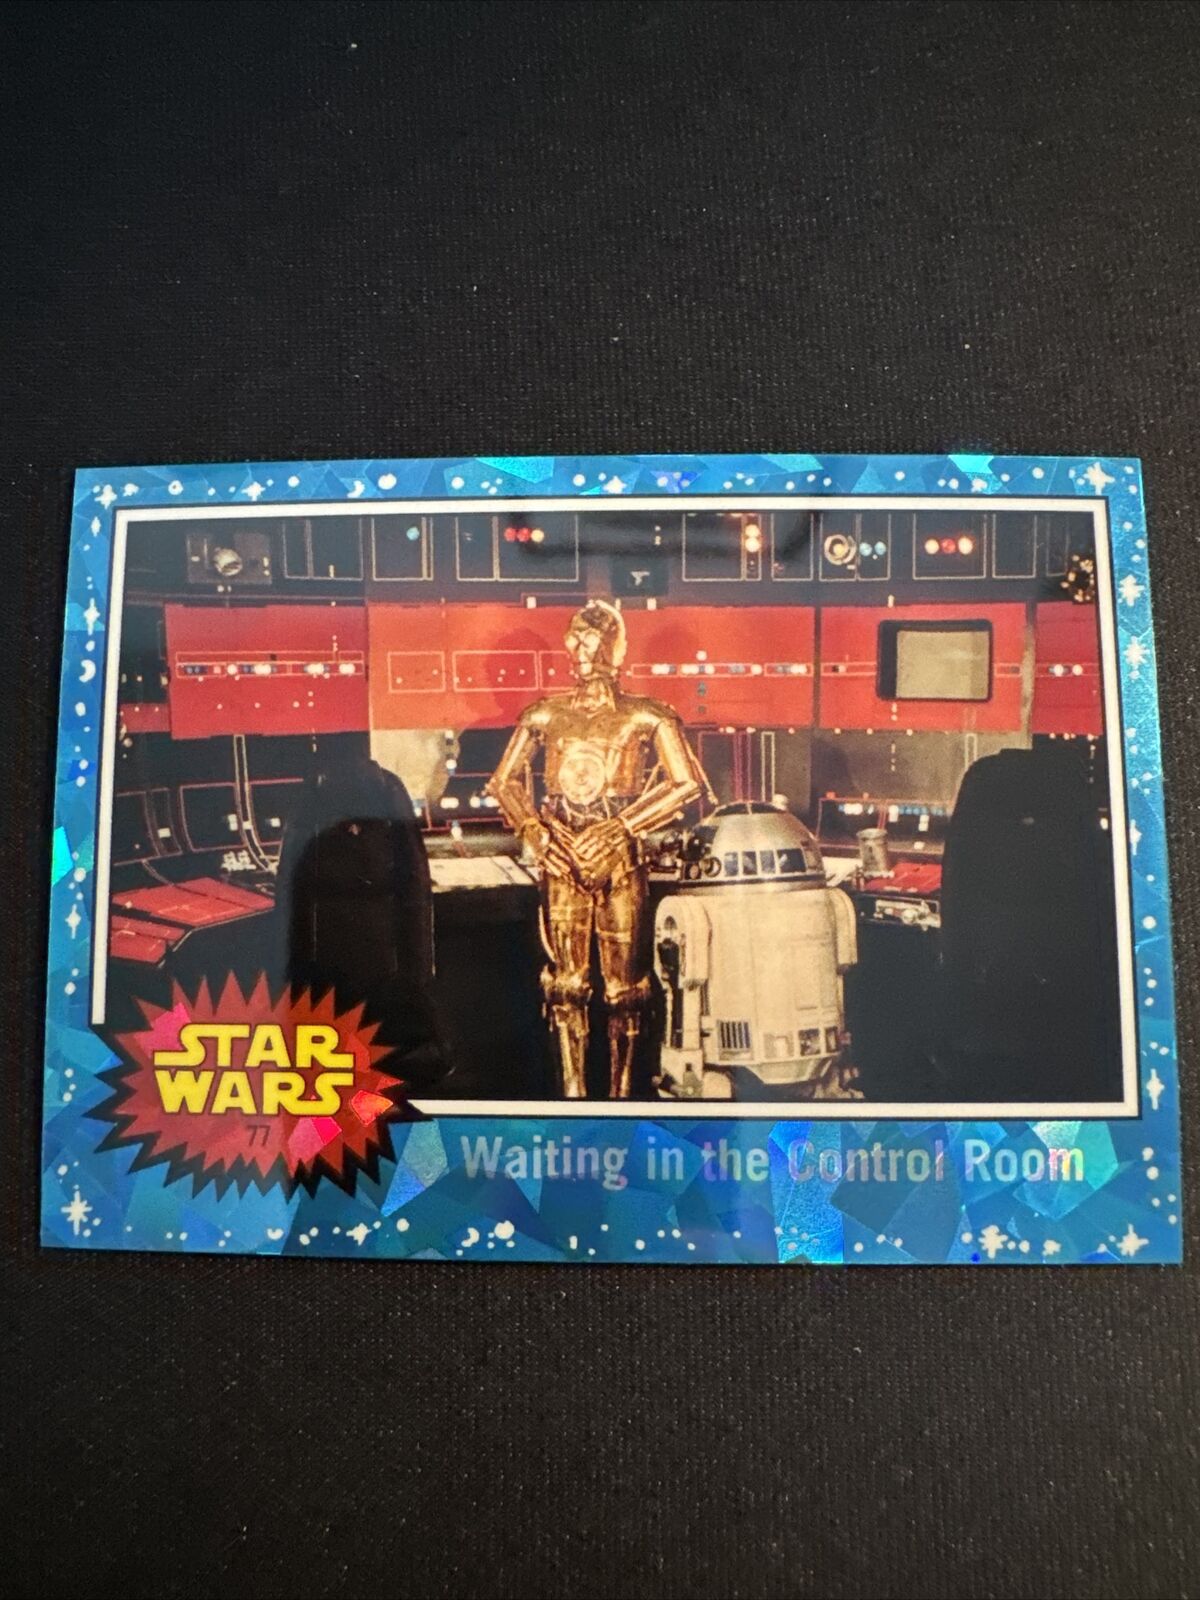 2022 Topps Chrome Sapphire Star Wars Card 77 Waiting In The Control Room